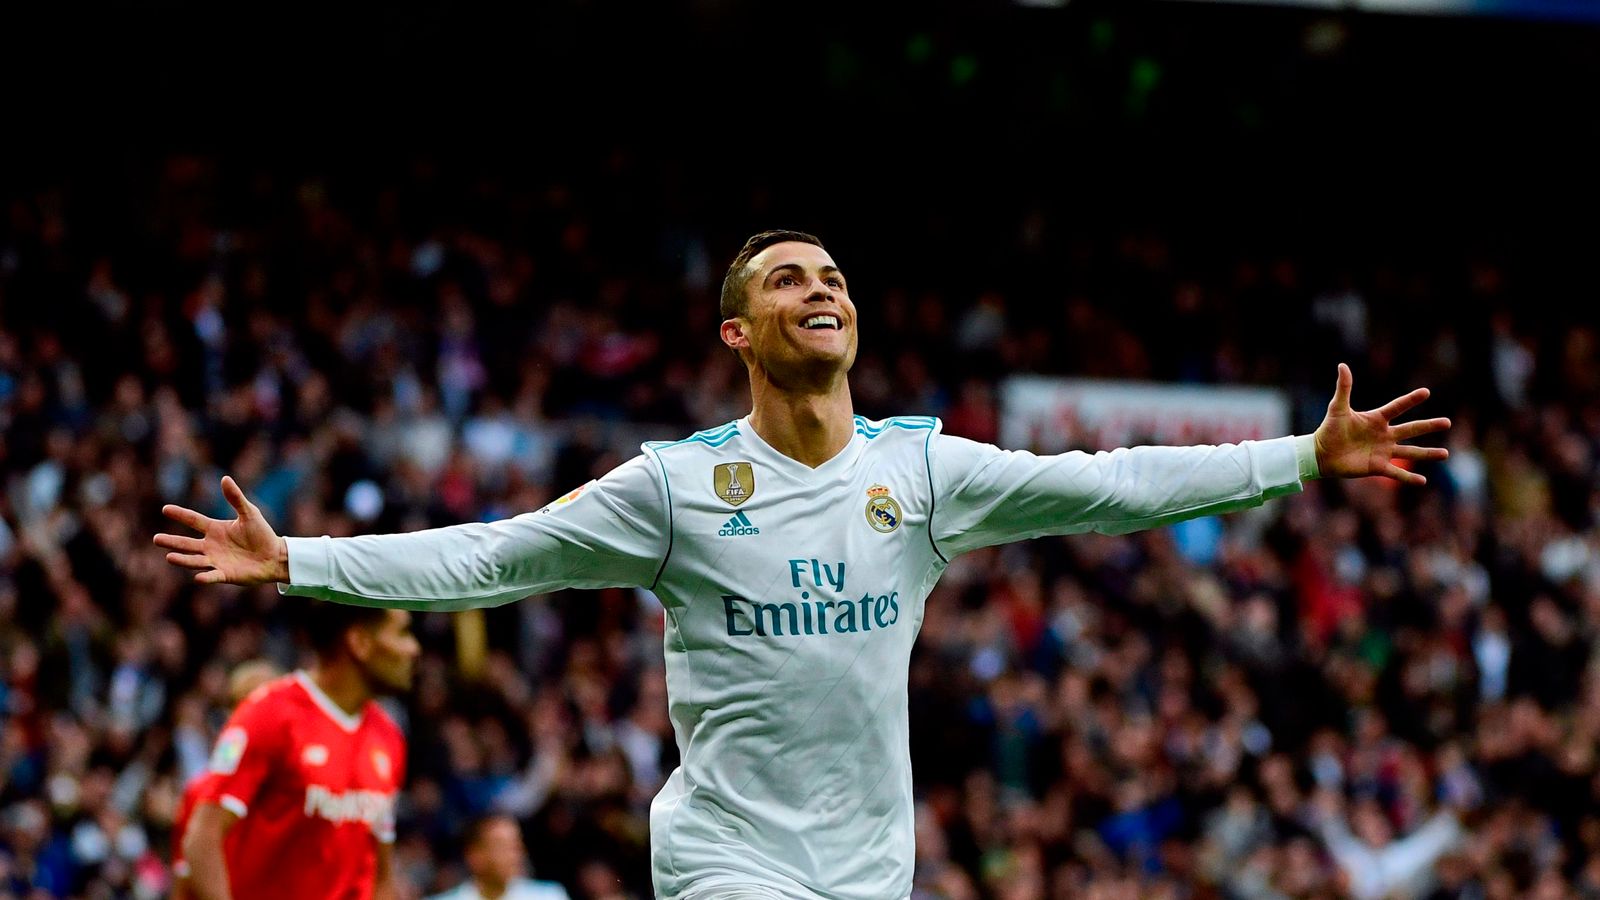 Cristiano Ronaldo says success with Real Madrid is due to selfbelief